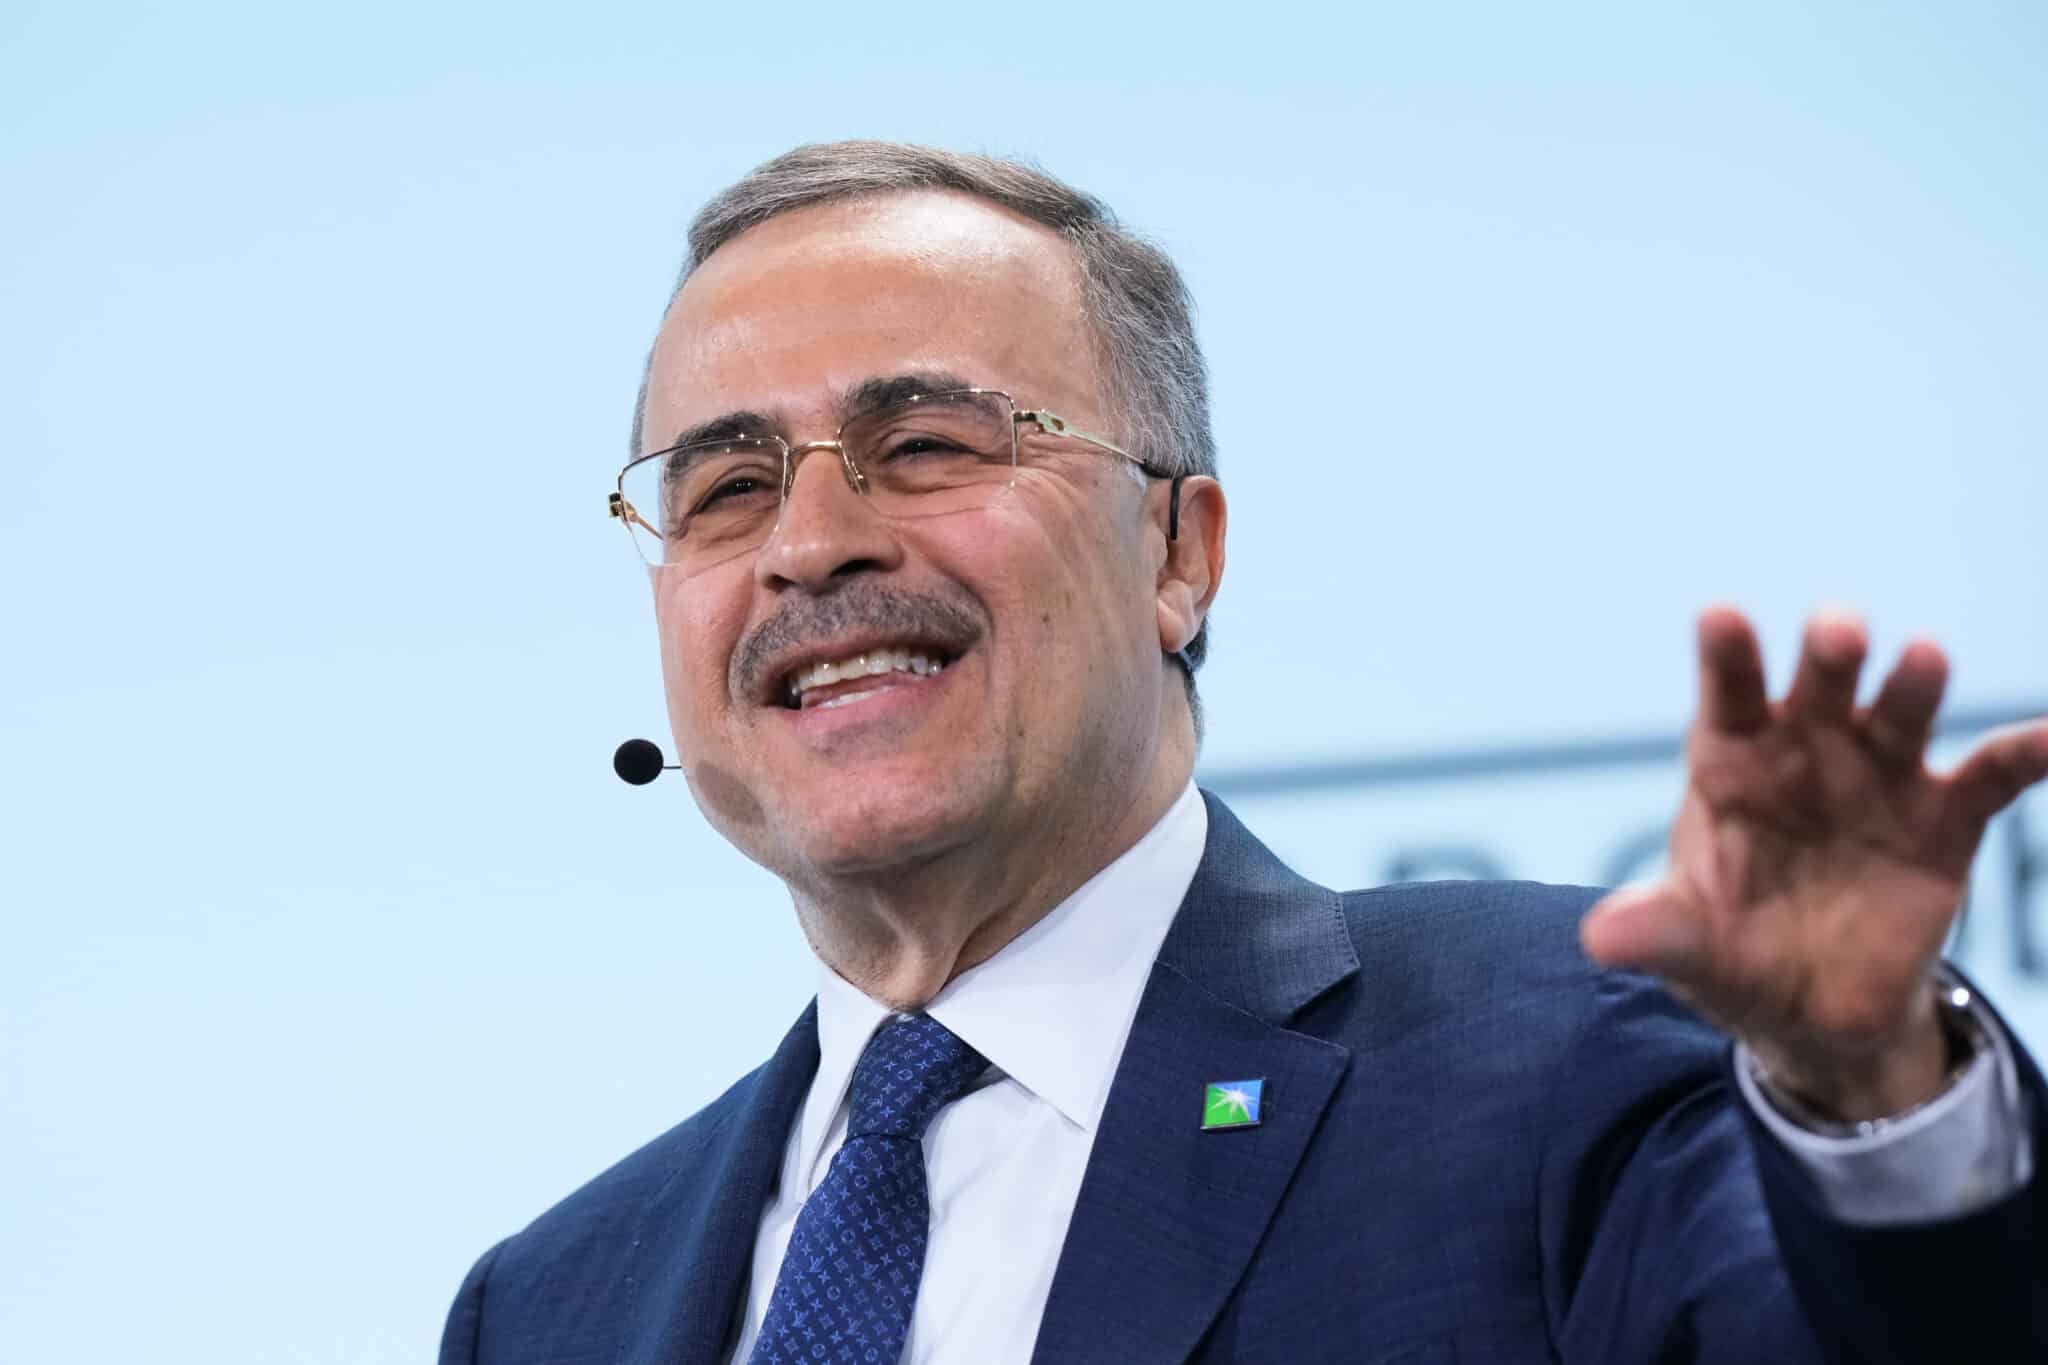 Saudi Aramco CEO says energy transition is failing, world should abandon ‘fantasy’ of phasing out oil